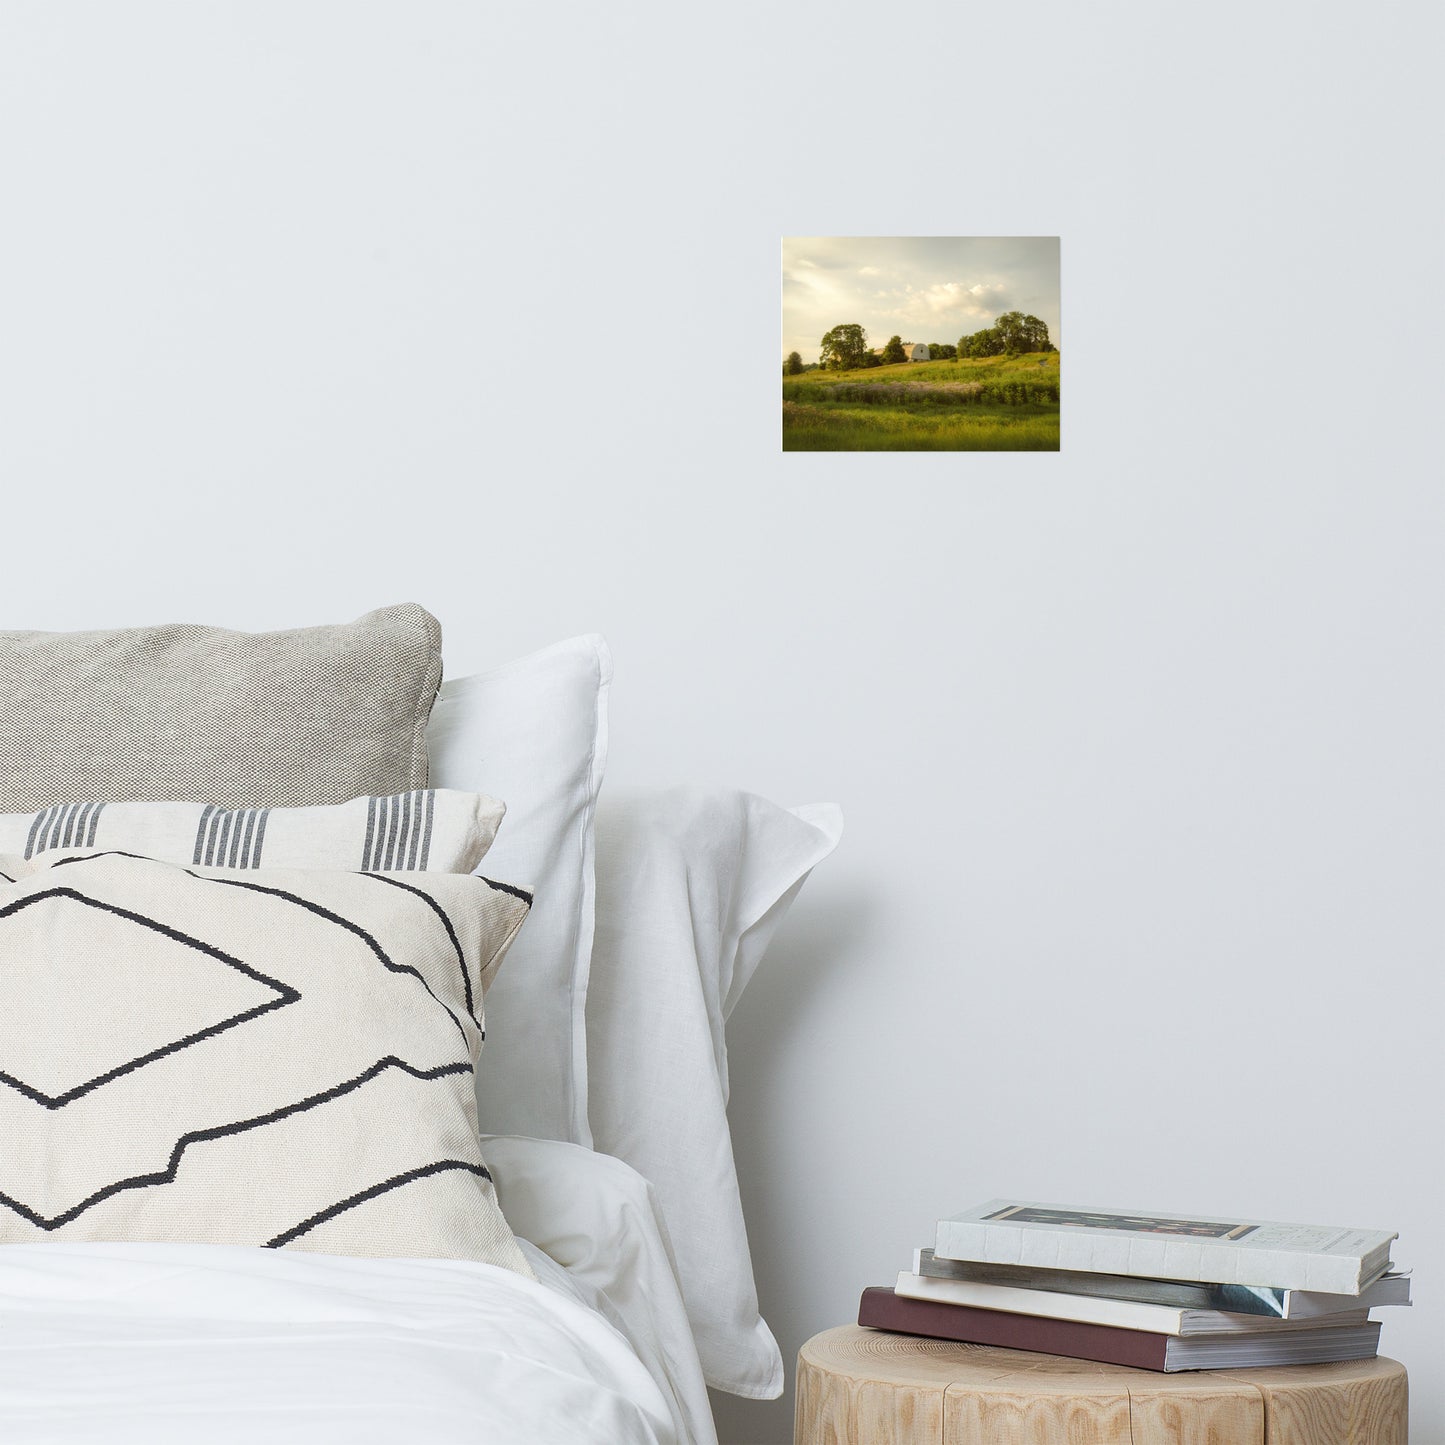 Remnant of Better Days Landscape Photo Loose Wall Art Prints